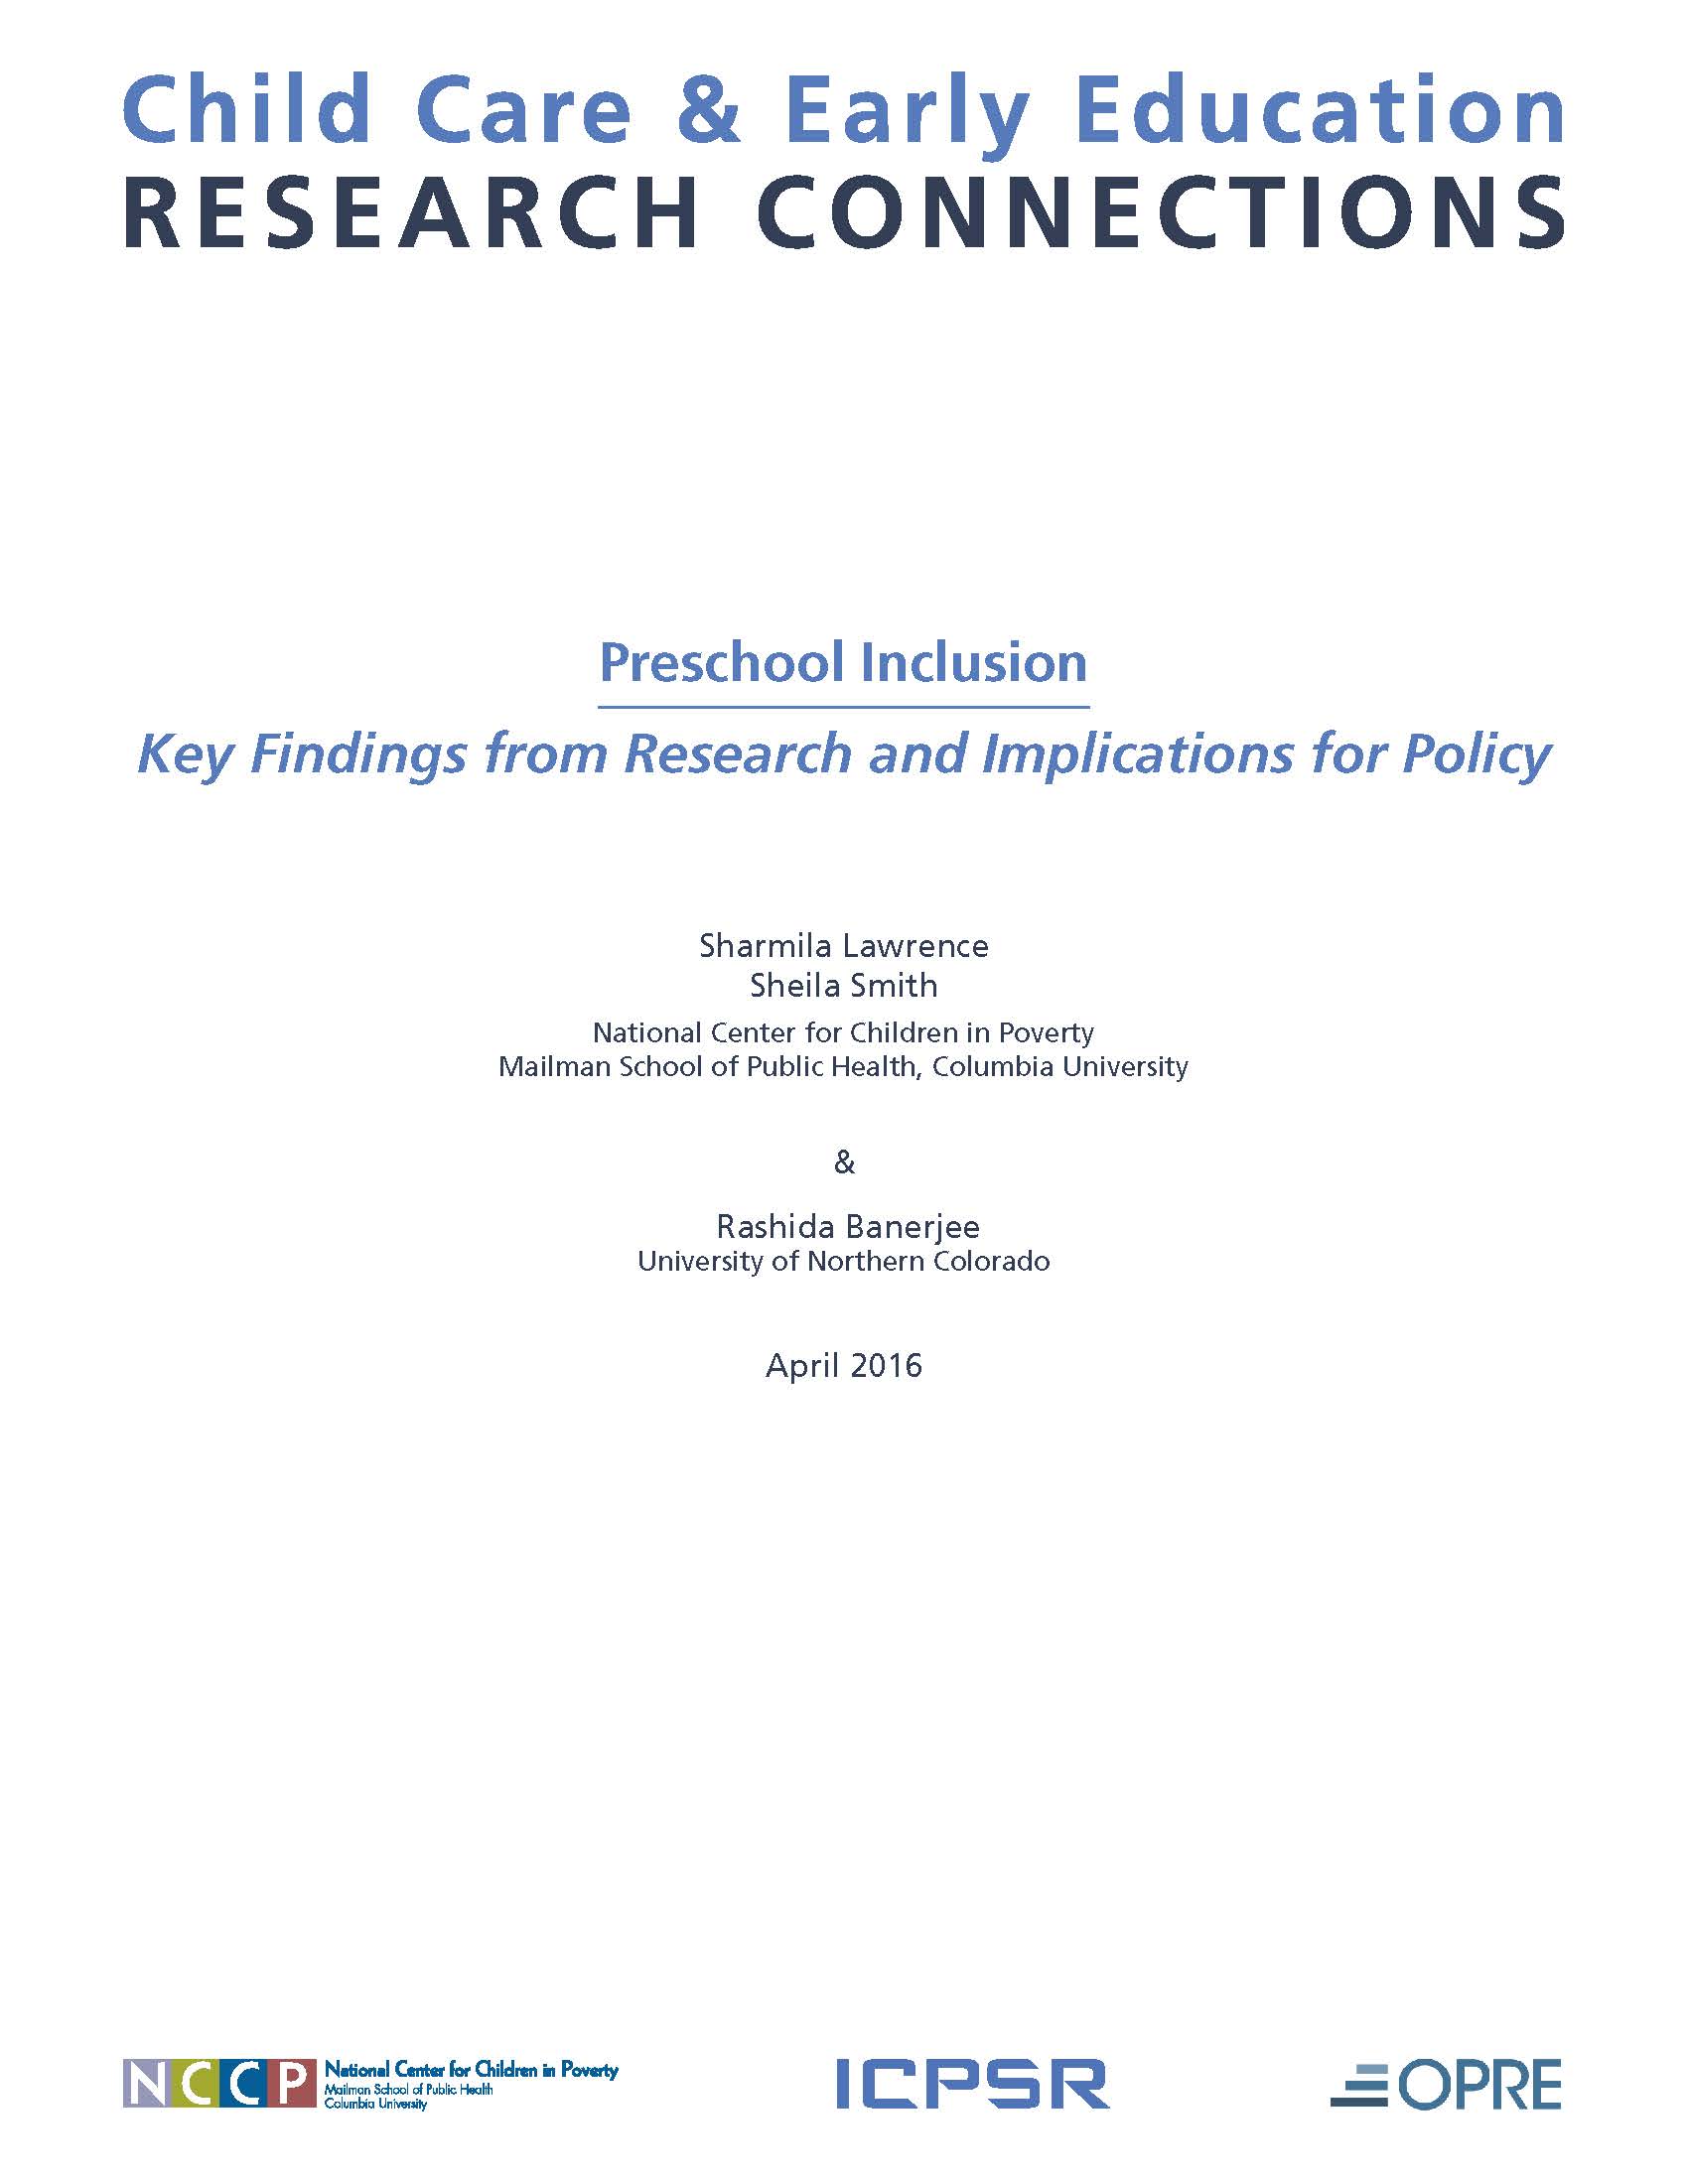 Preschool Inclusion Key Findings from Research and Implications for Policy